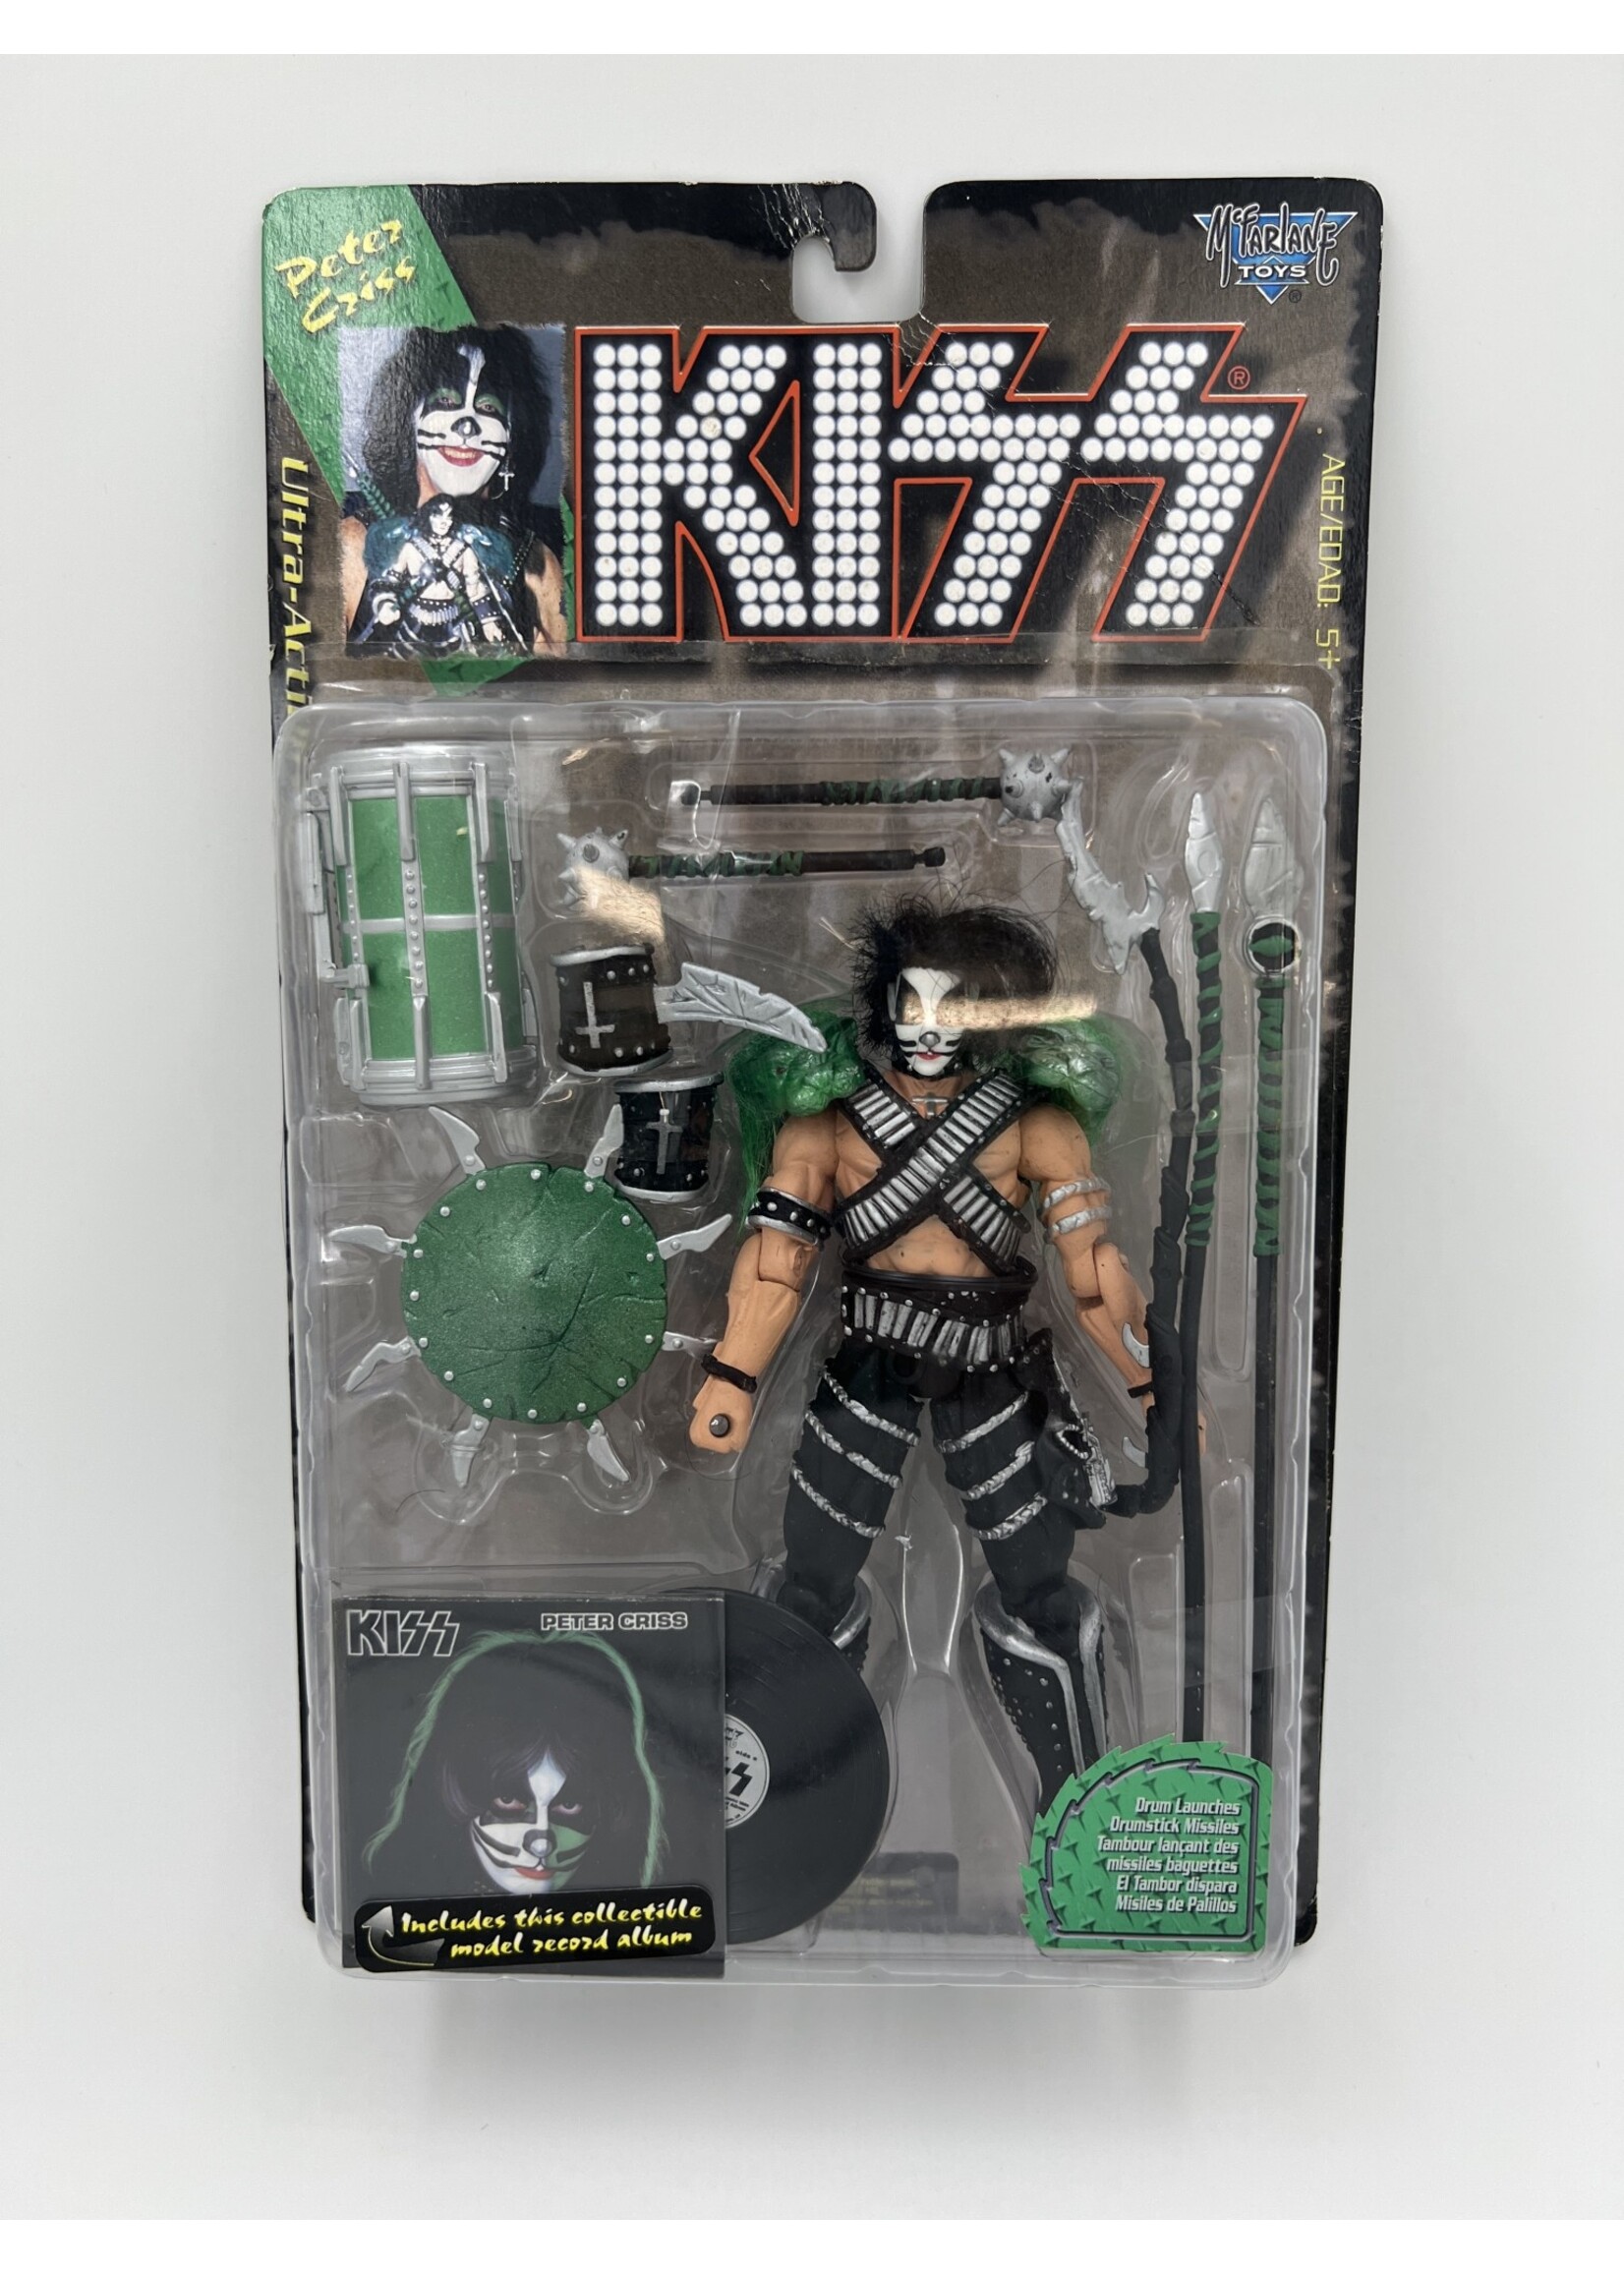 Action Figures Peter Criss Kiss McFarlane Ultra Action Figure With Collectible Album